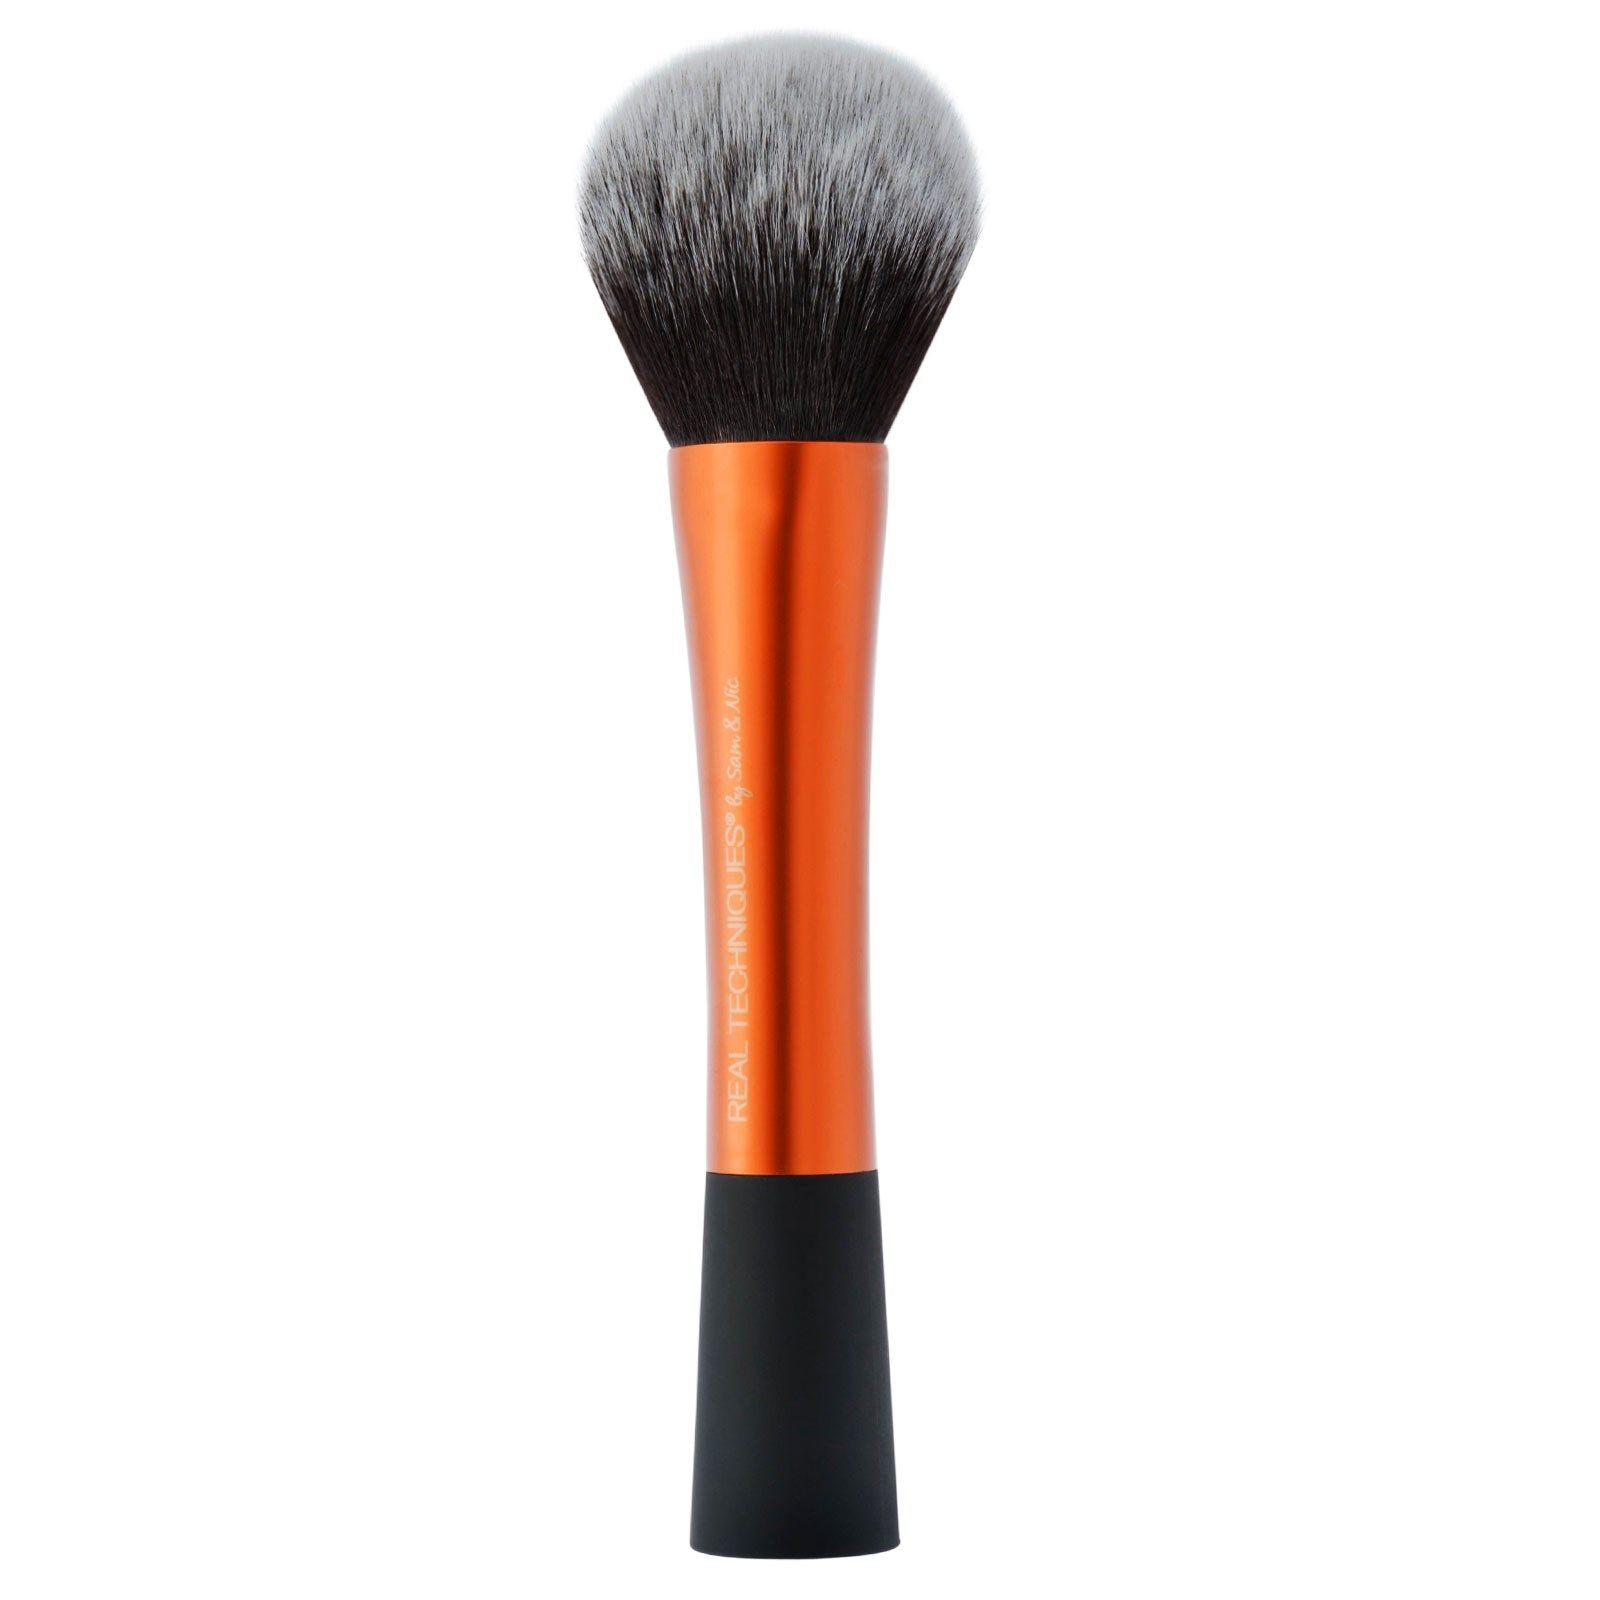 Real Techniques Base Powder Face Brush